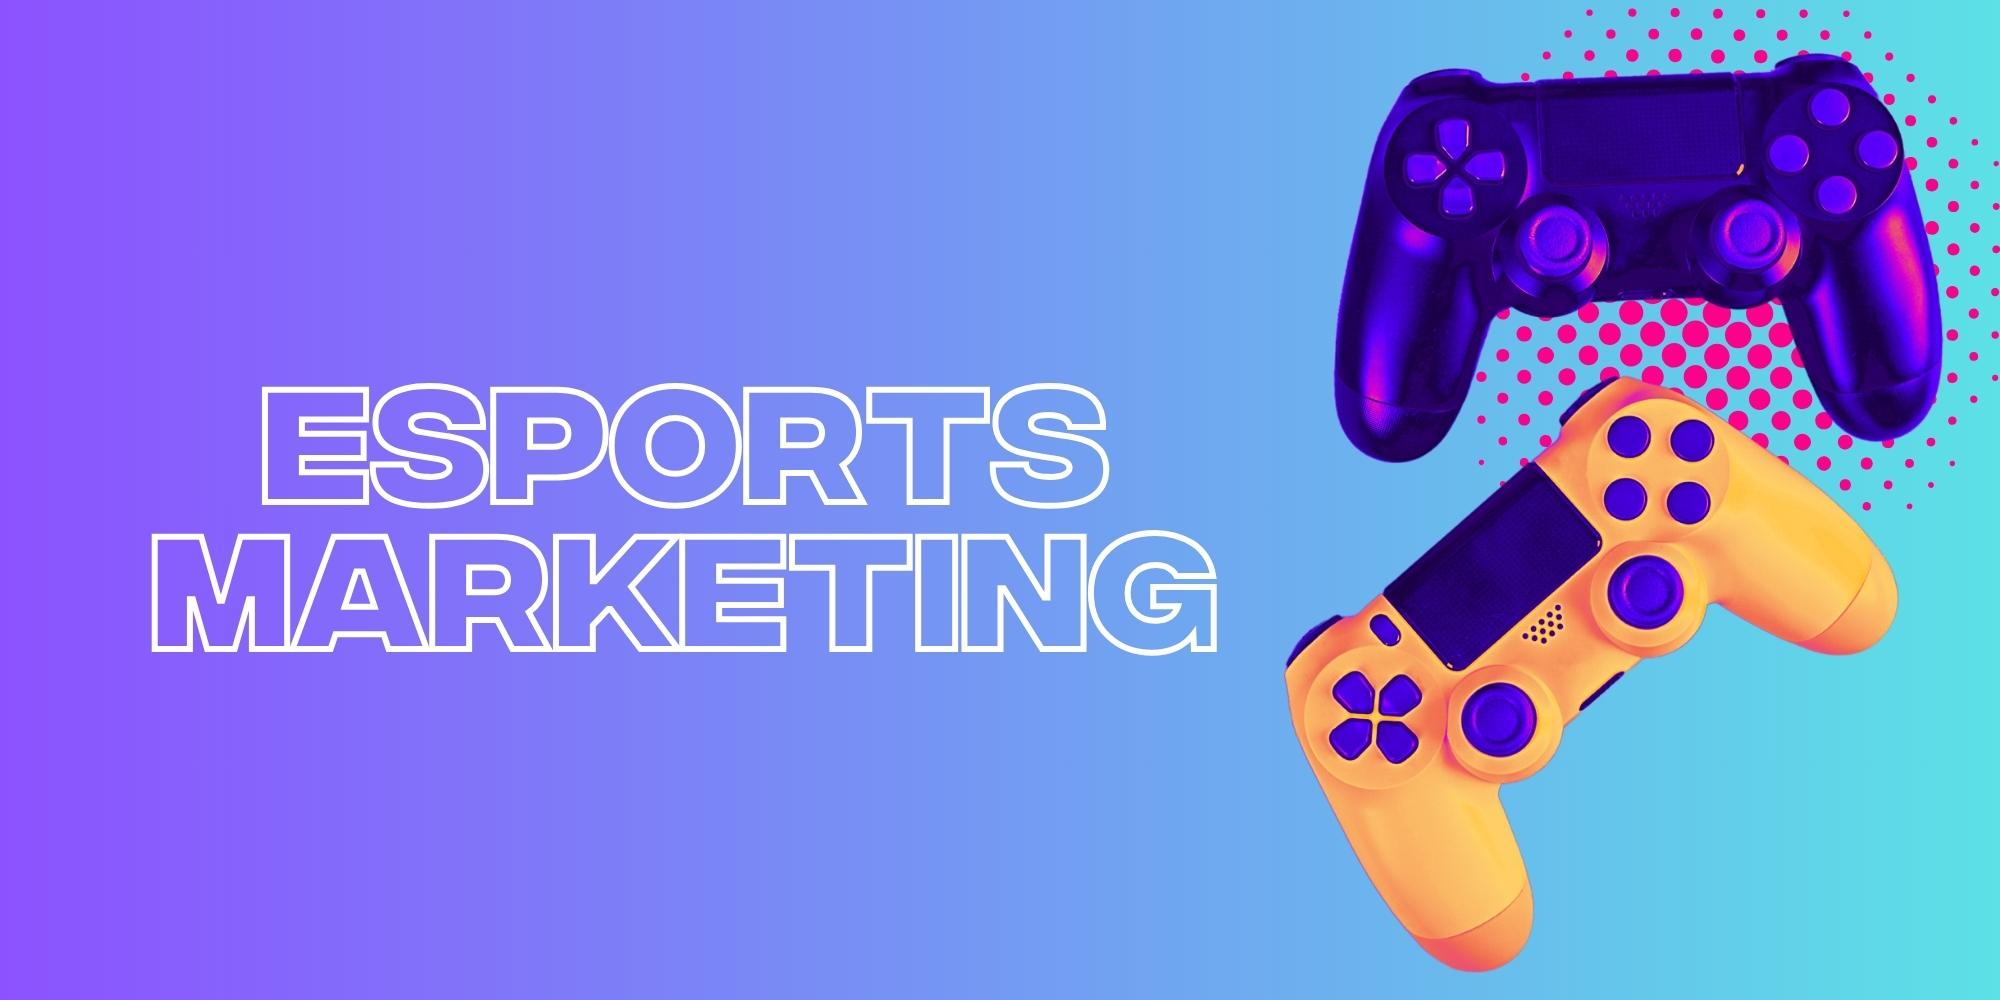 Esports Marketing Strategies and Opportunities for Growth